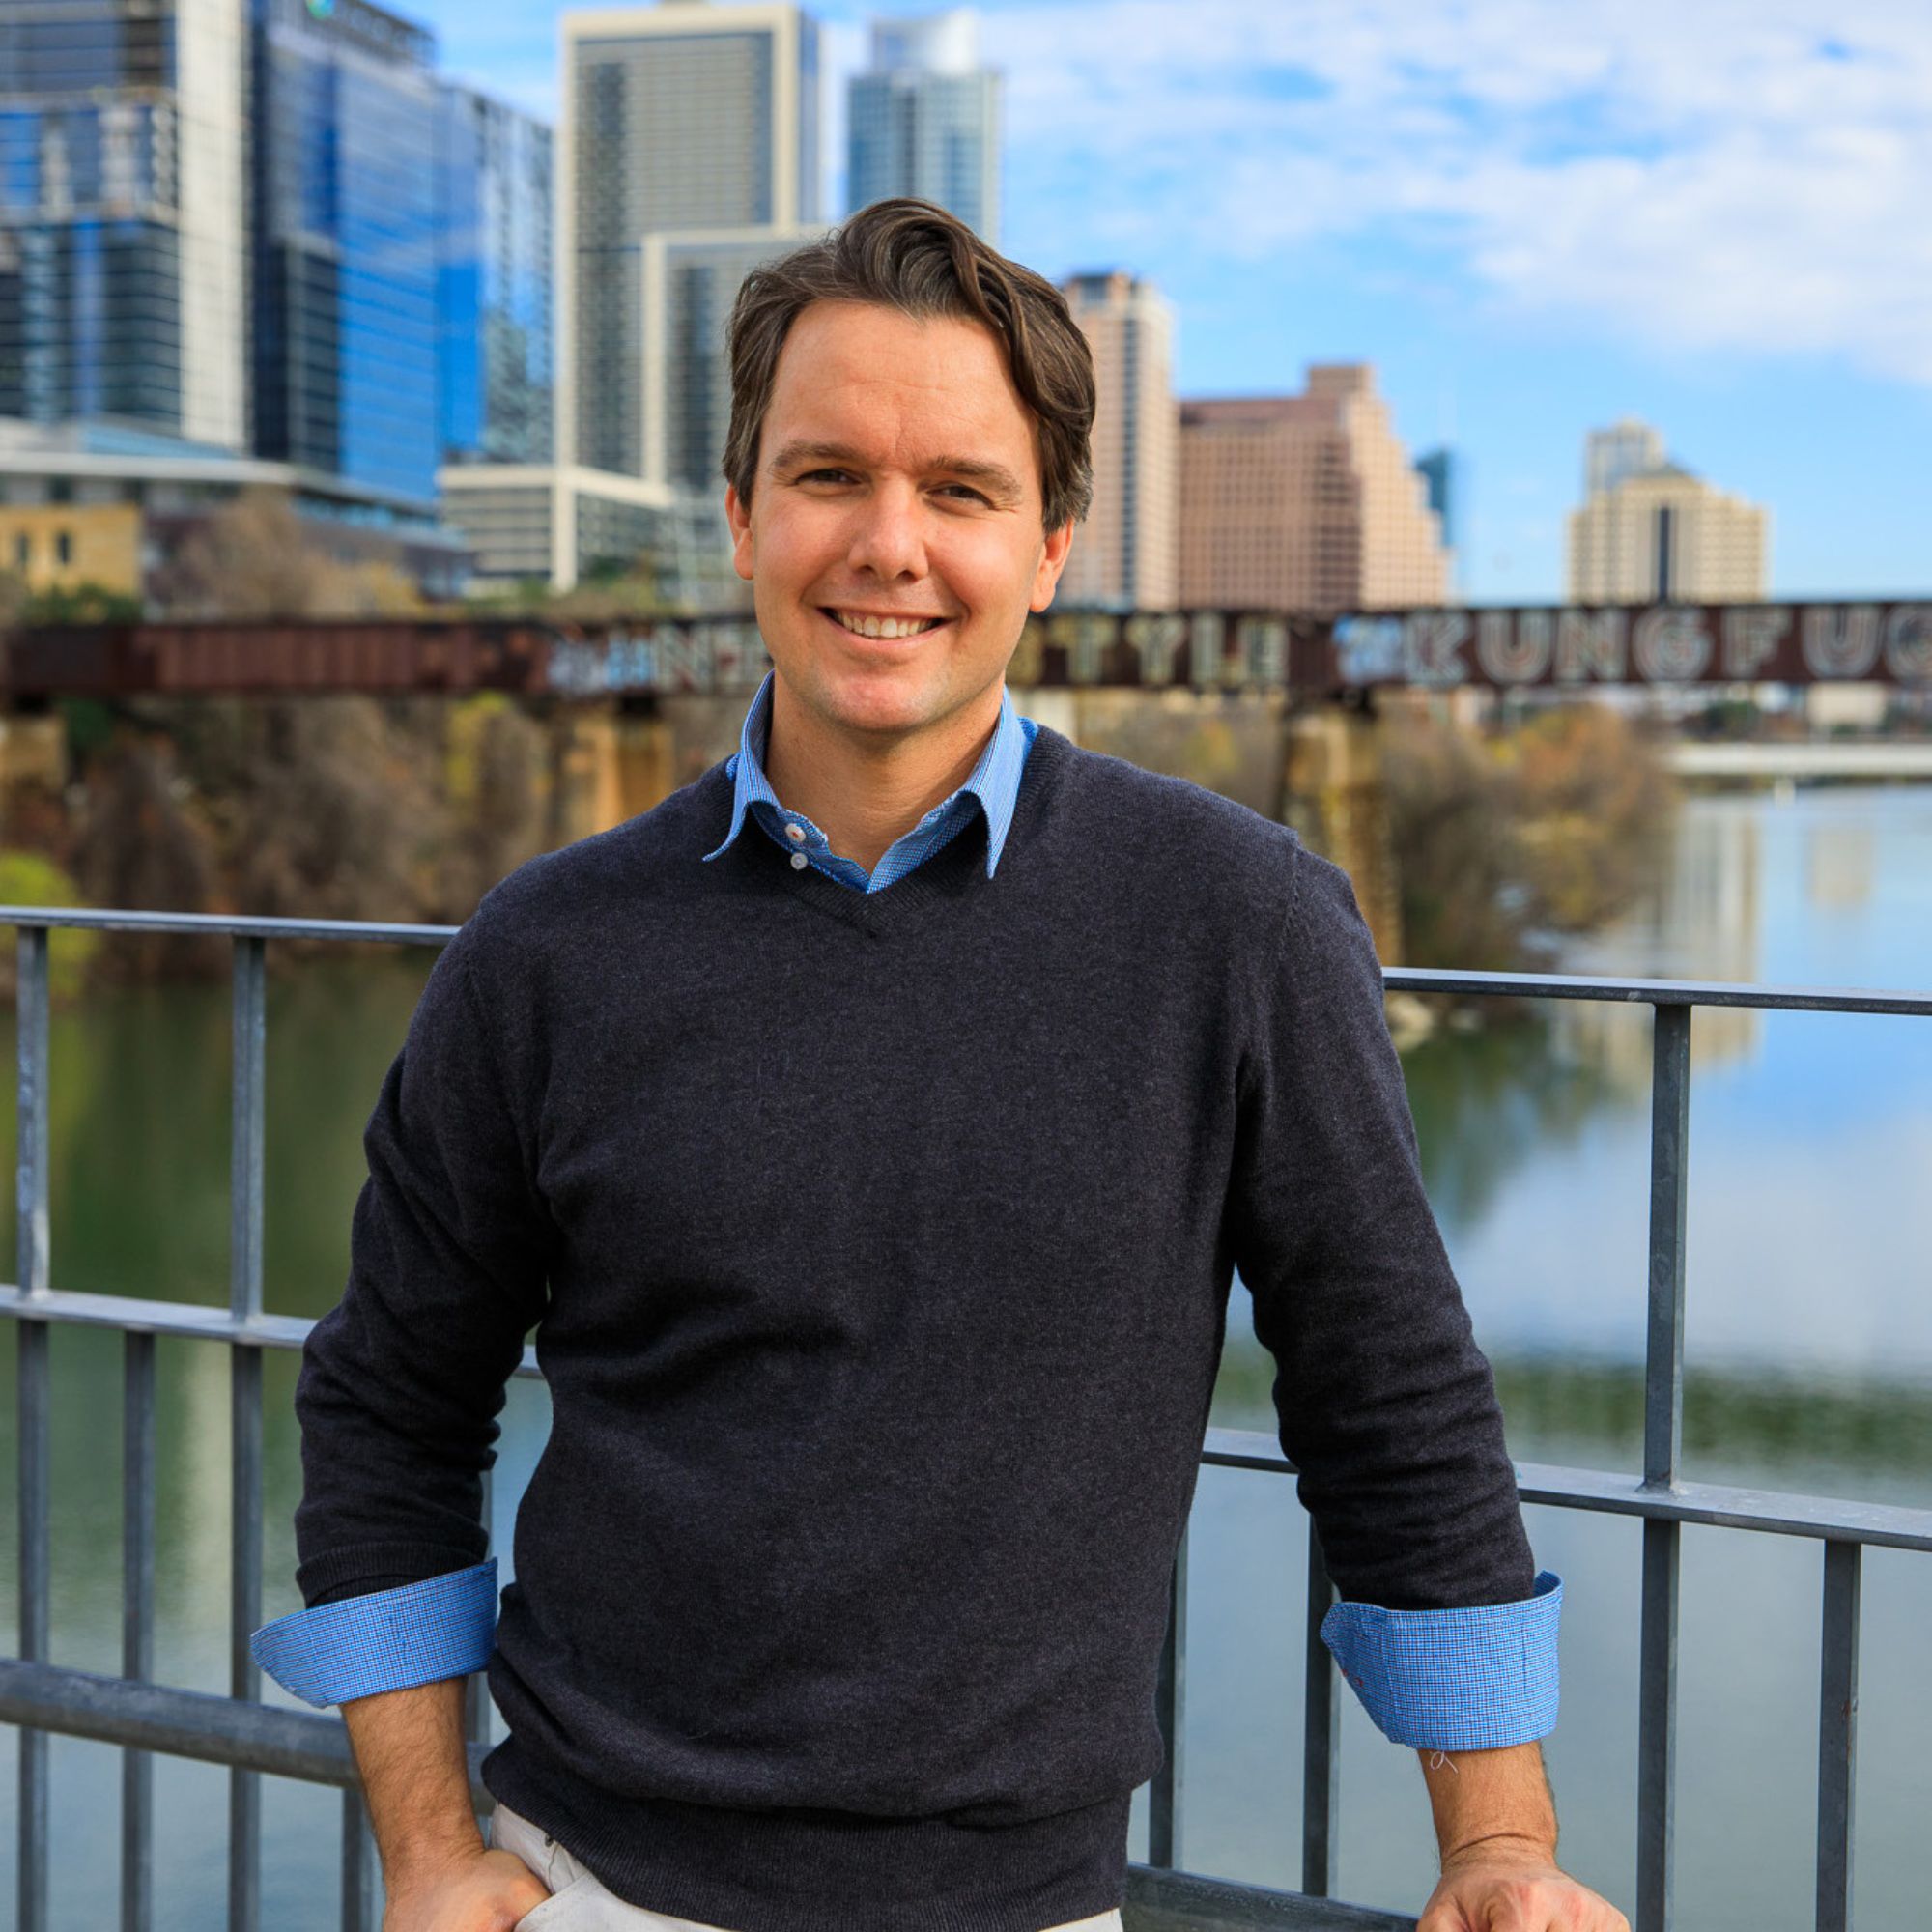 A picture of Eric Bramlett, a man in a blue jumper in front of a river with skyscrapers in the background